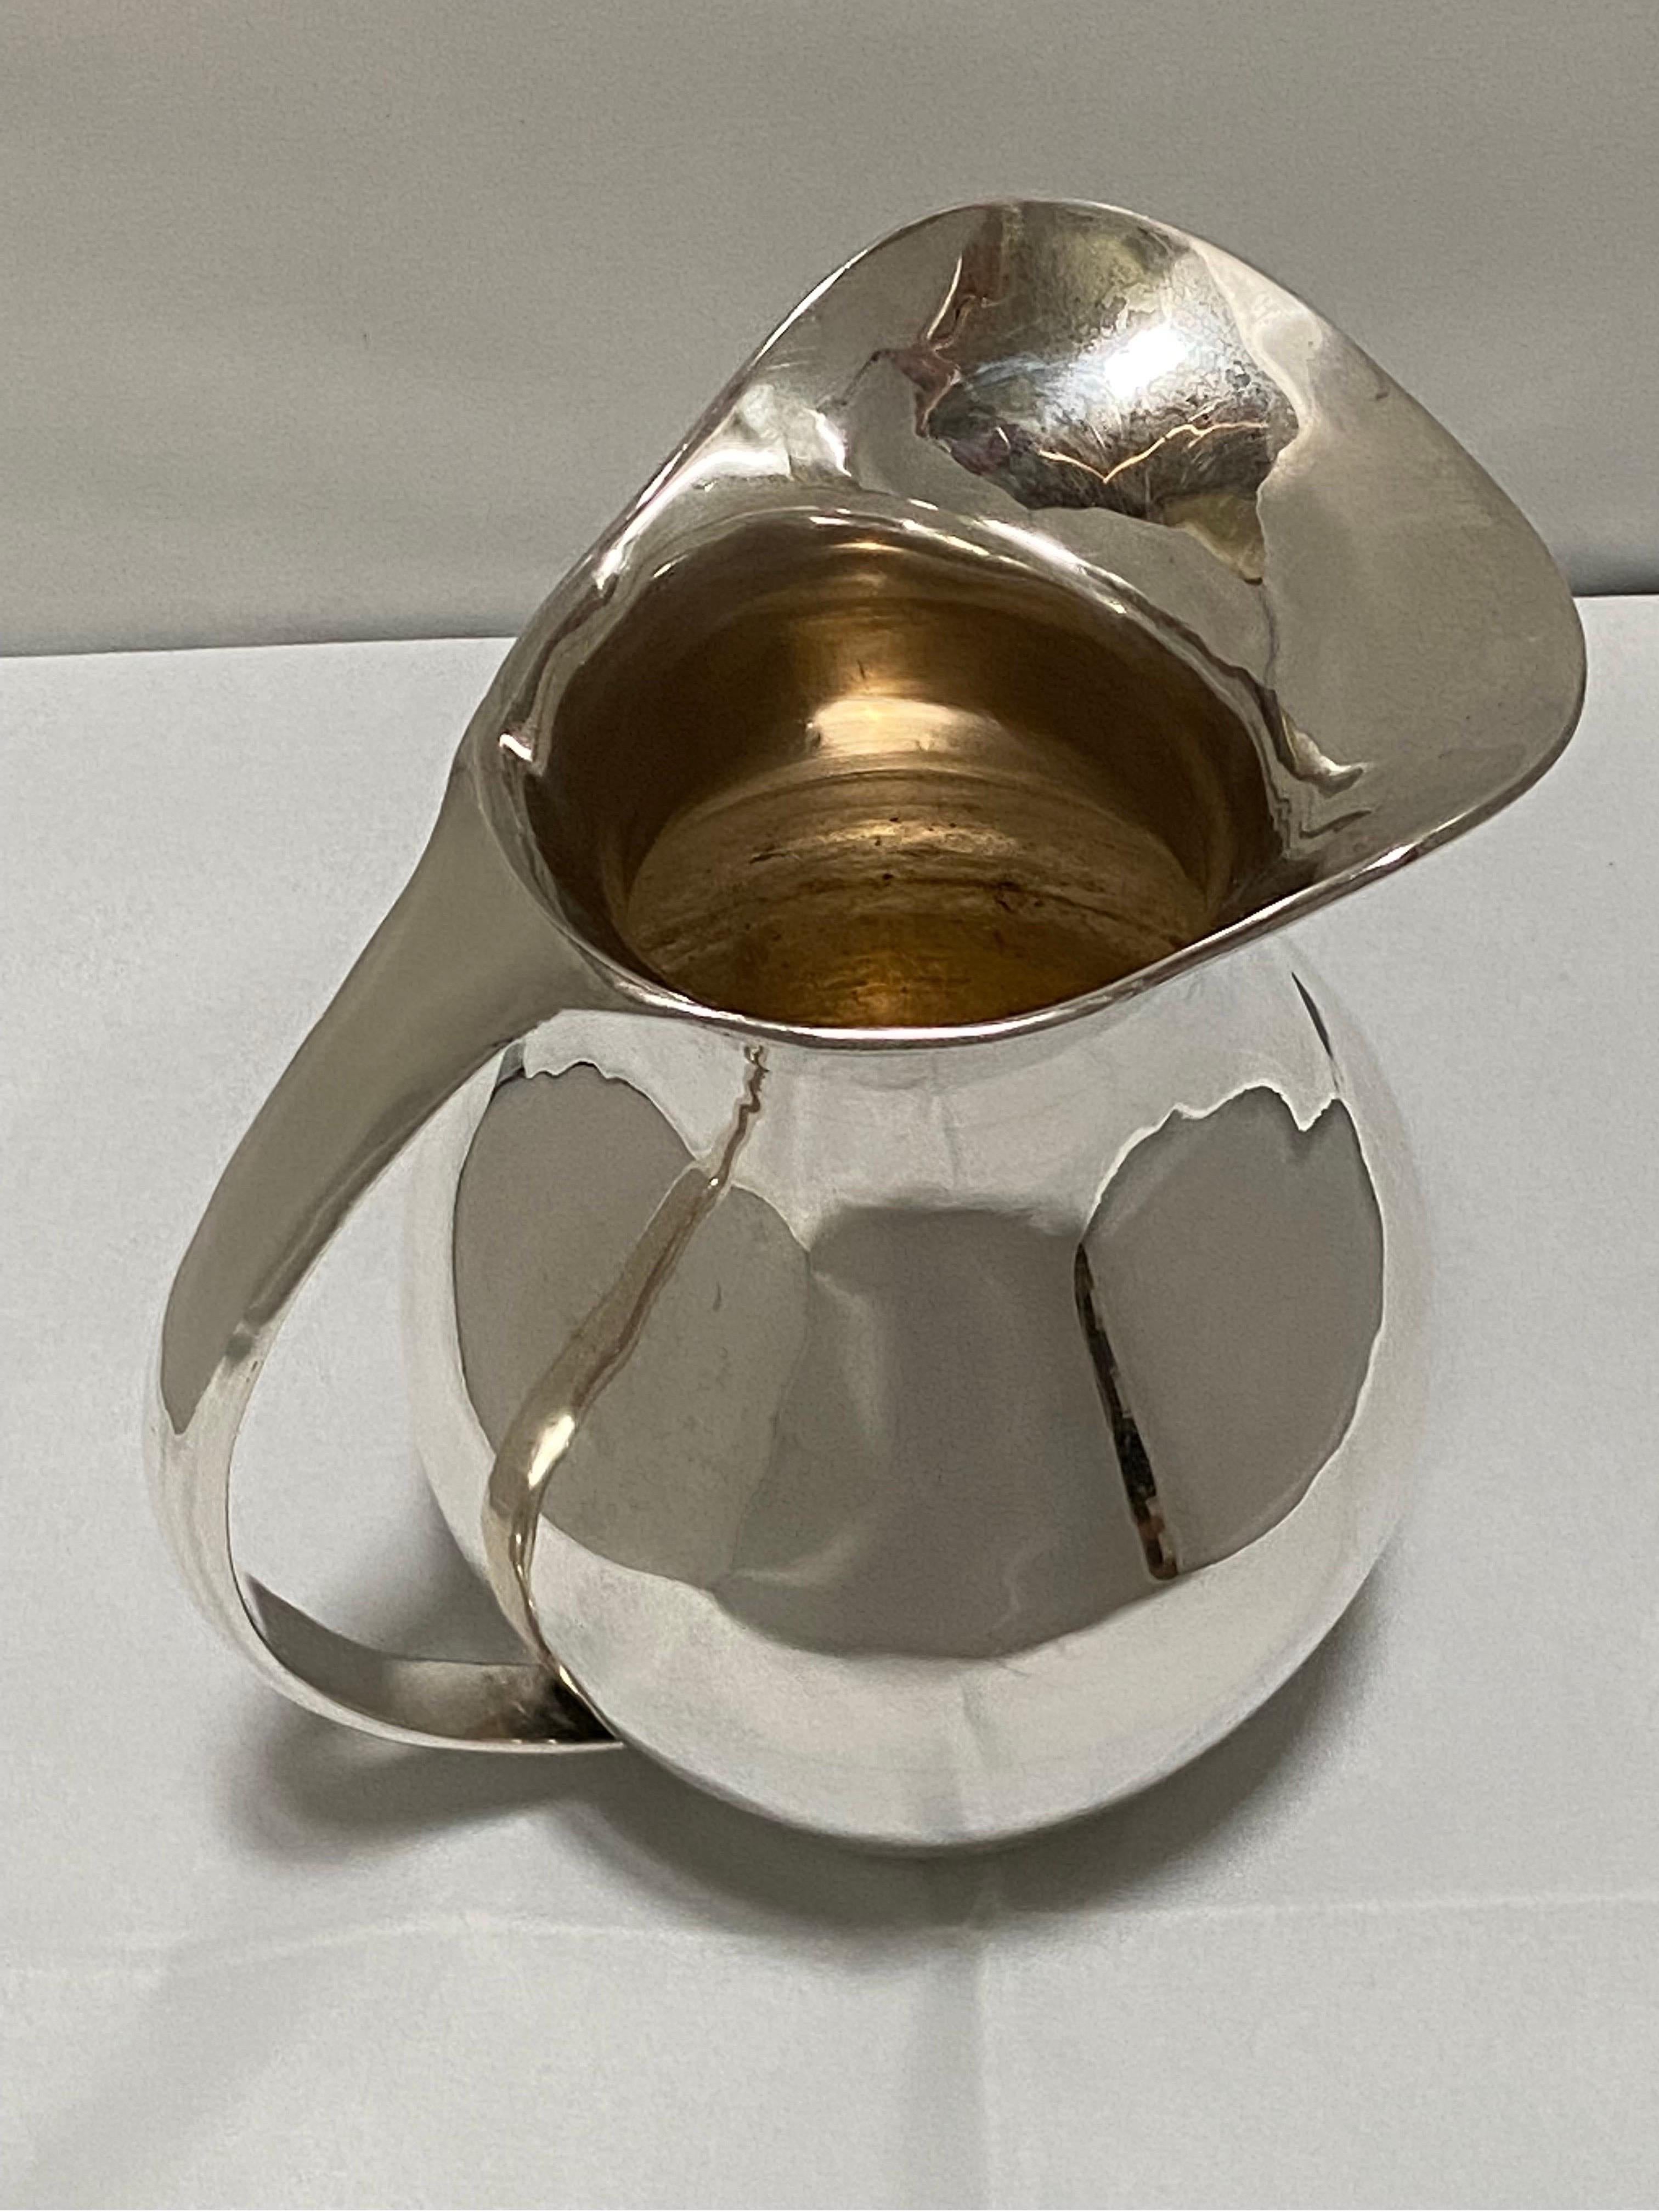 Vintage Mid-Century Mexican Sterling Silver Modernist Pitcher or Ewer by Zurita In Good Condition For Sale In Atlanta, GA